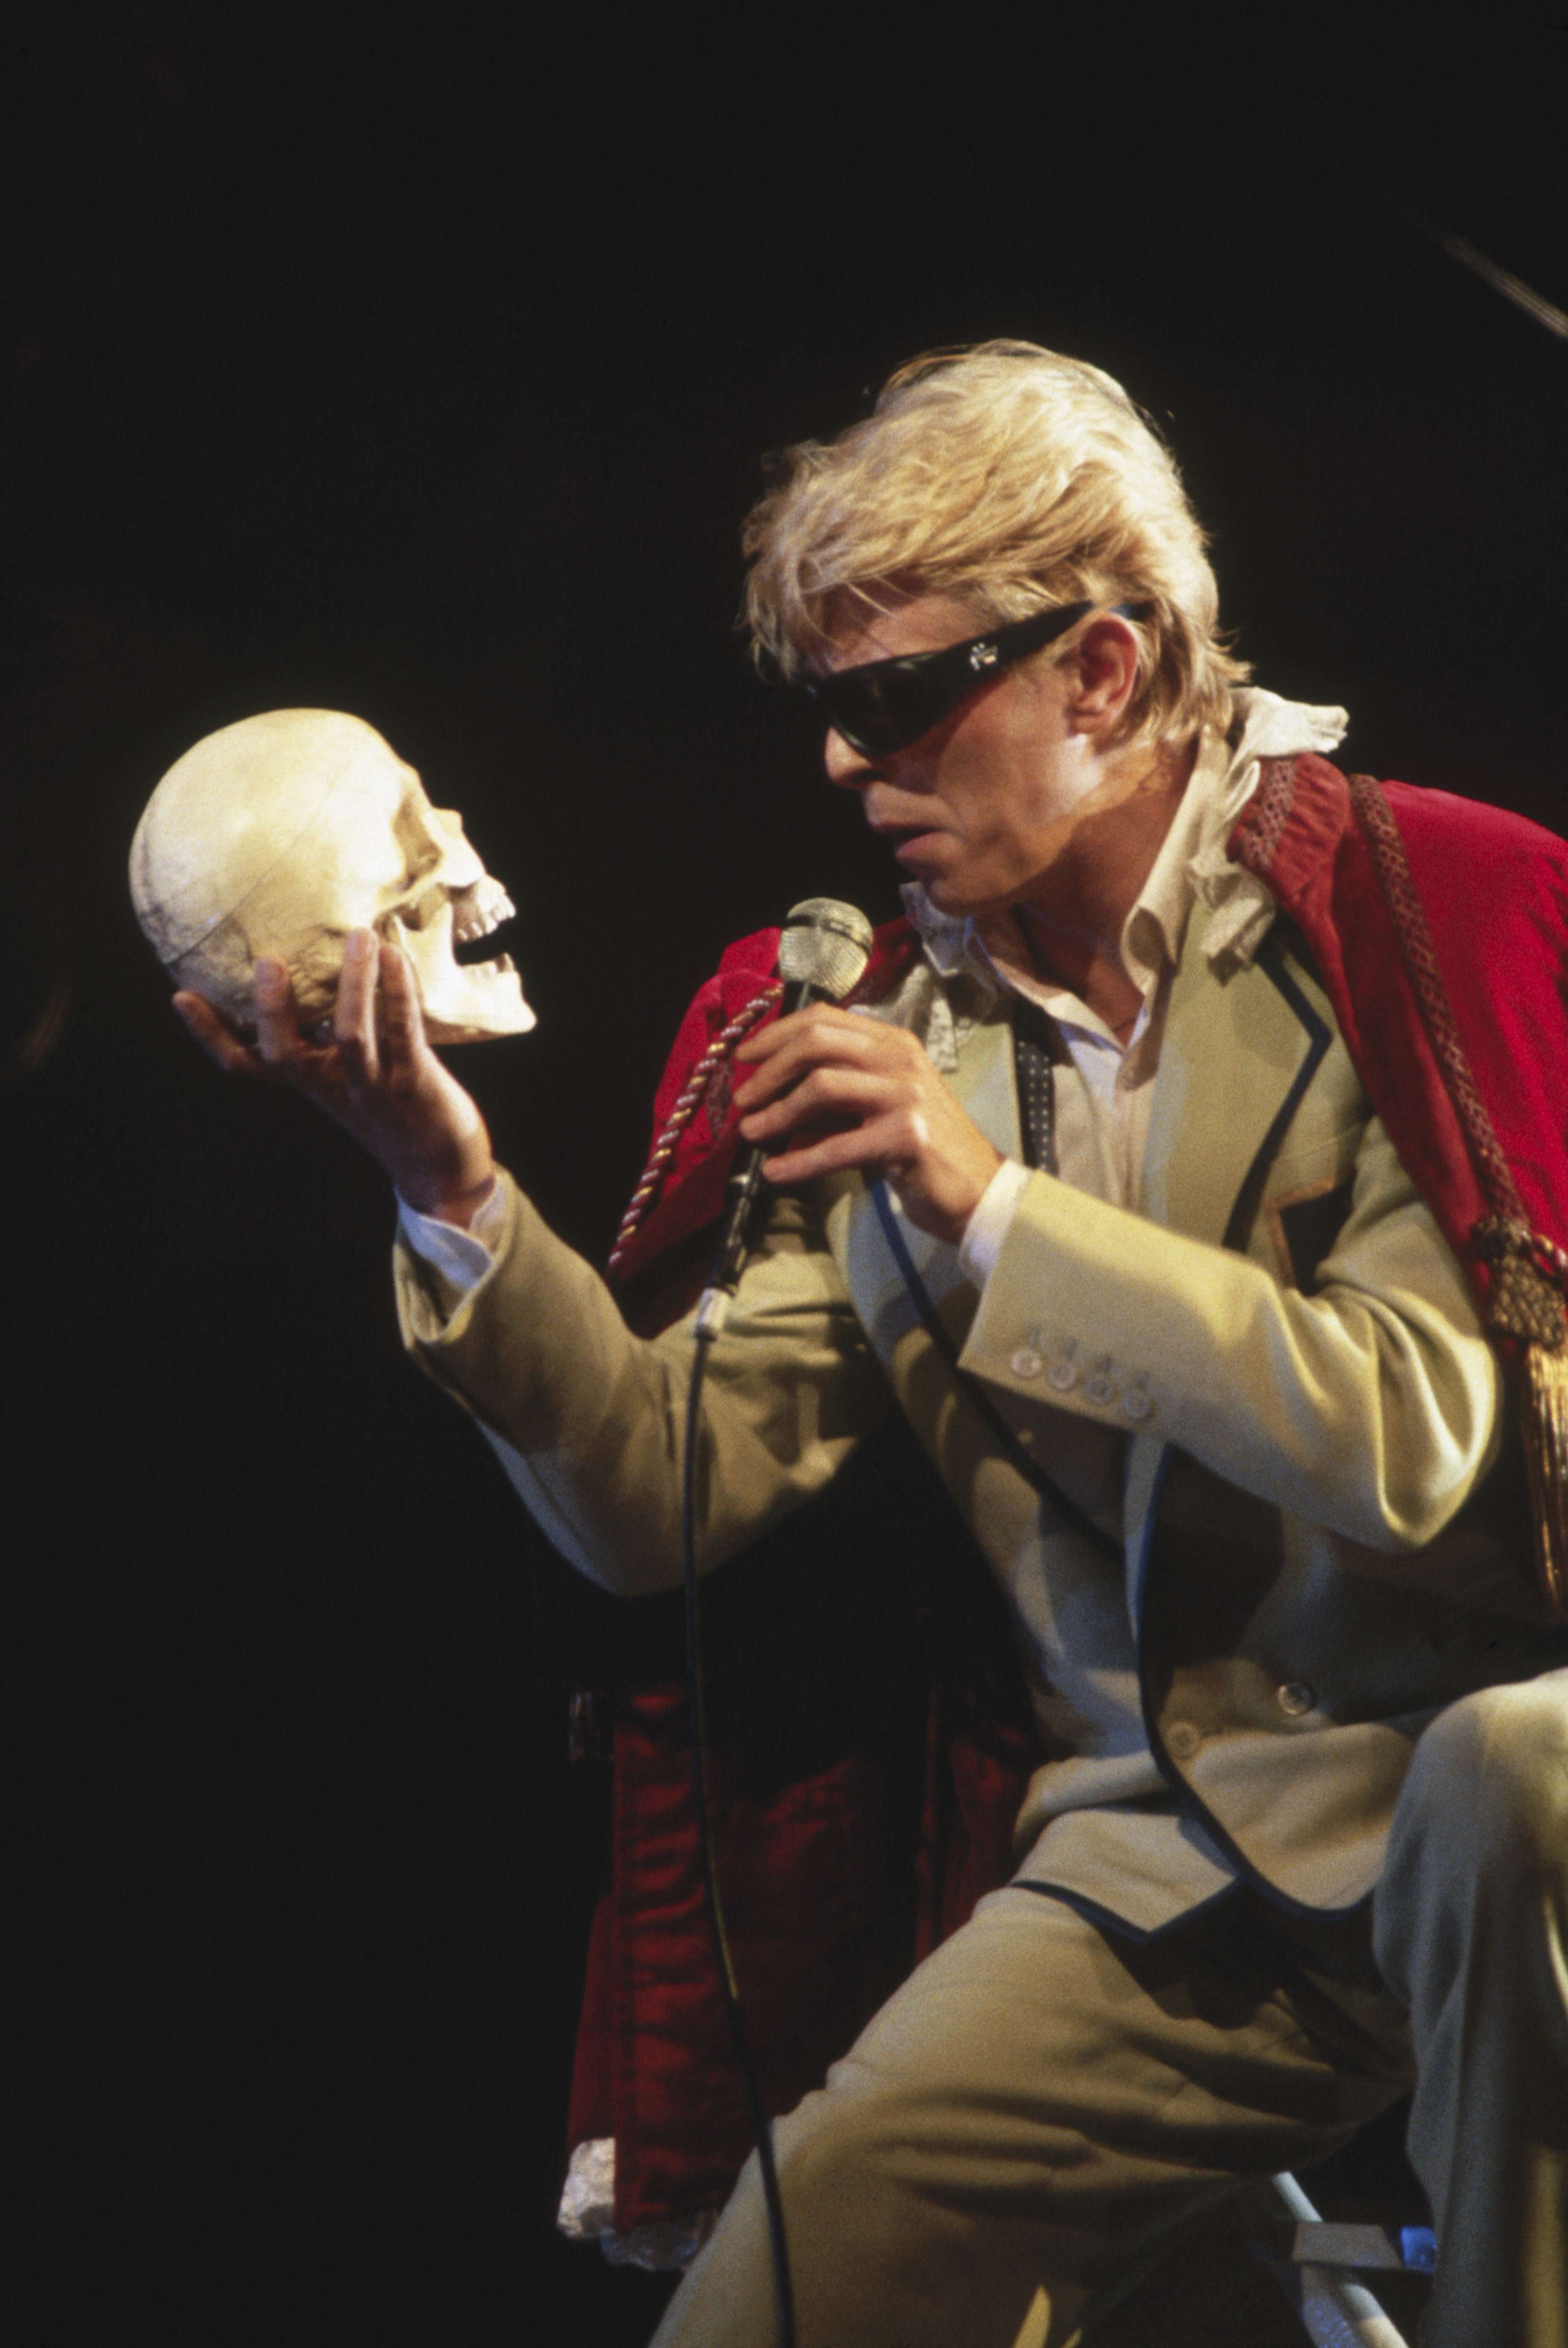 Bowie making a reference to Shakespeare’s Hamlet during the “Serious Moonlight” tour in the 1980s. Bowie was a constant reader and brought his reading into all aspects of his work. Photo: Corbis